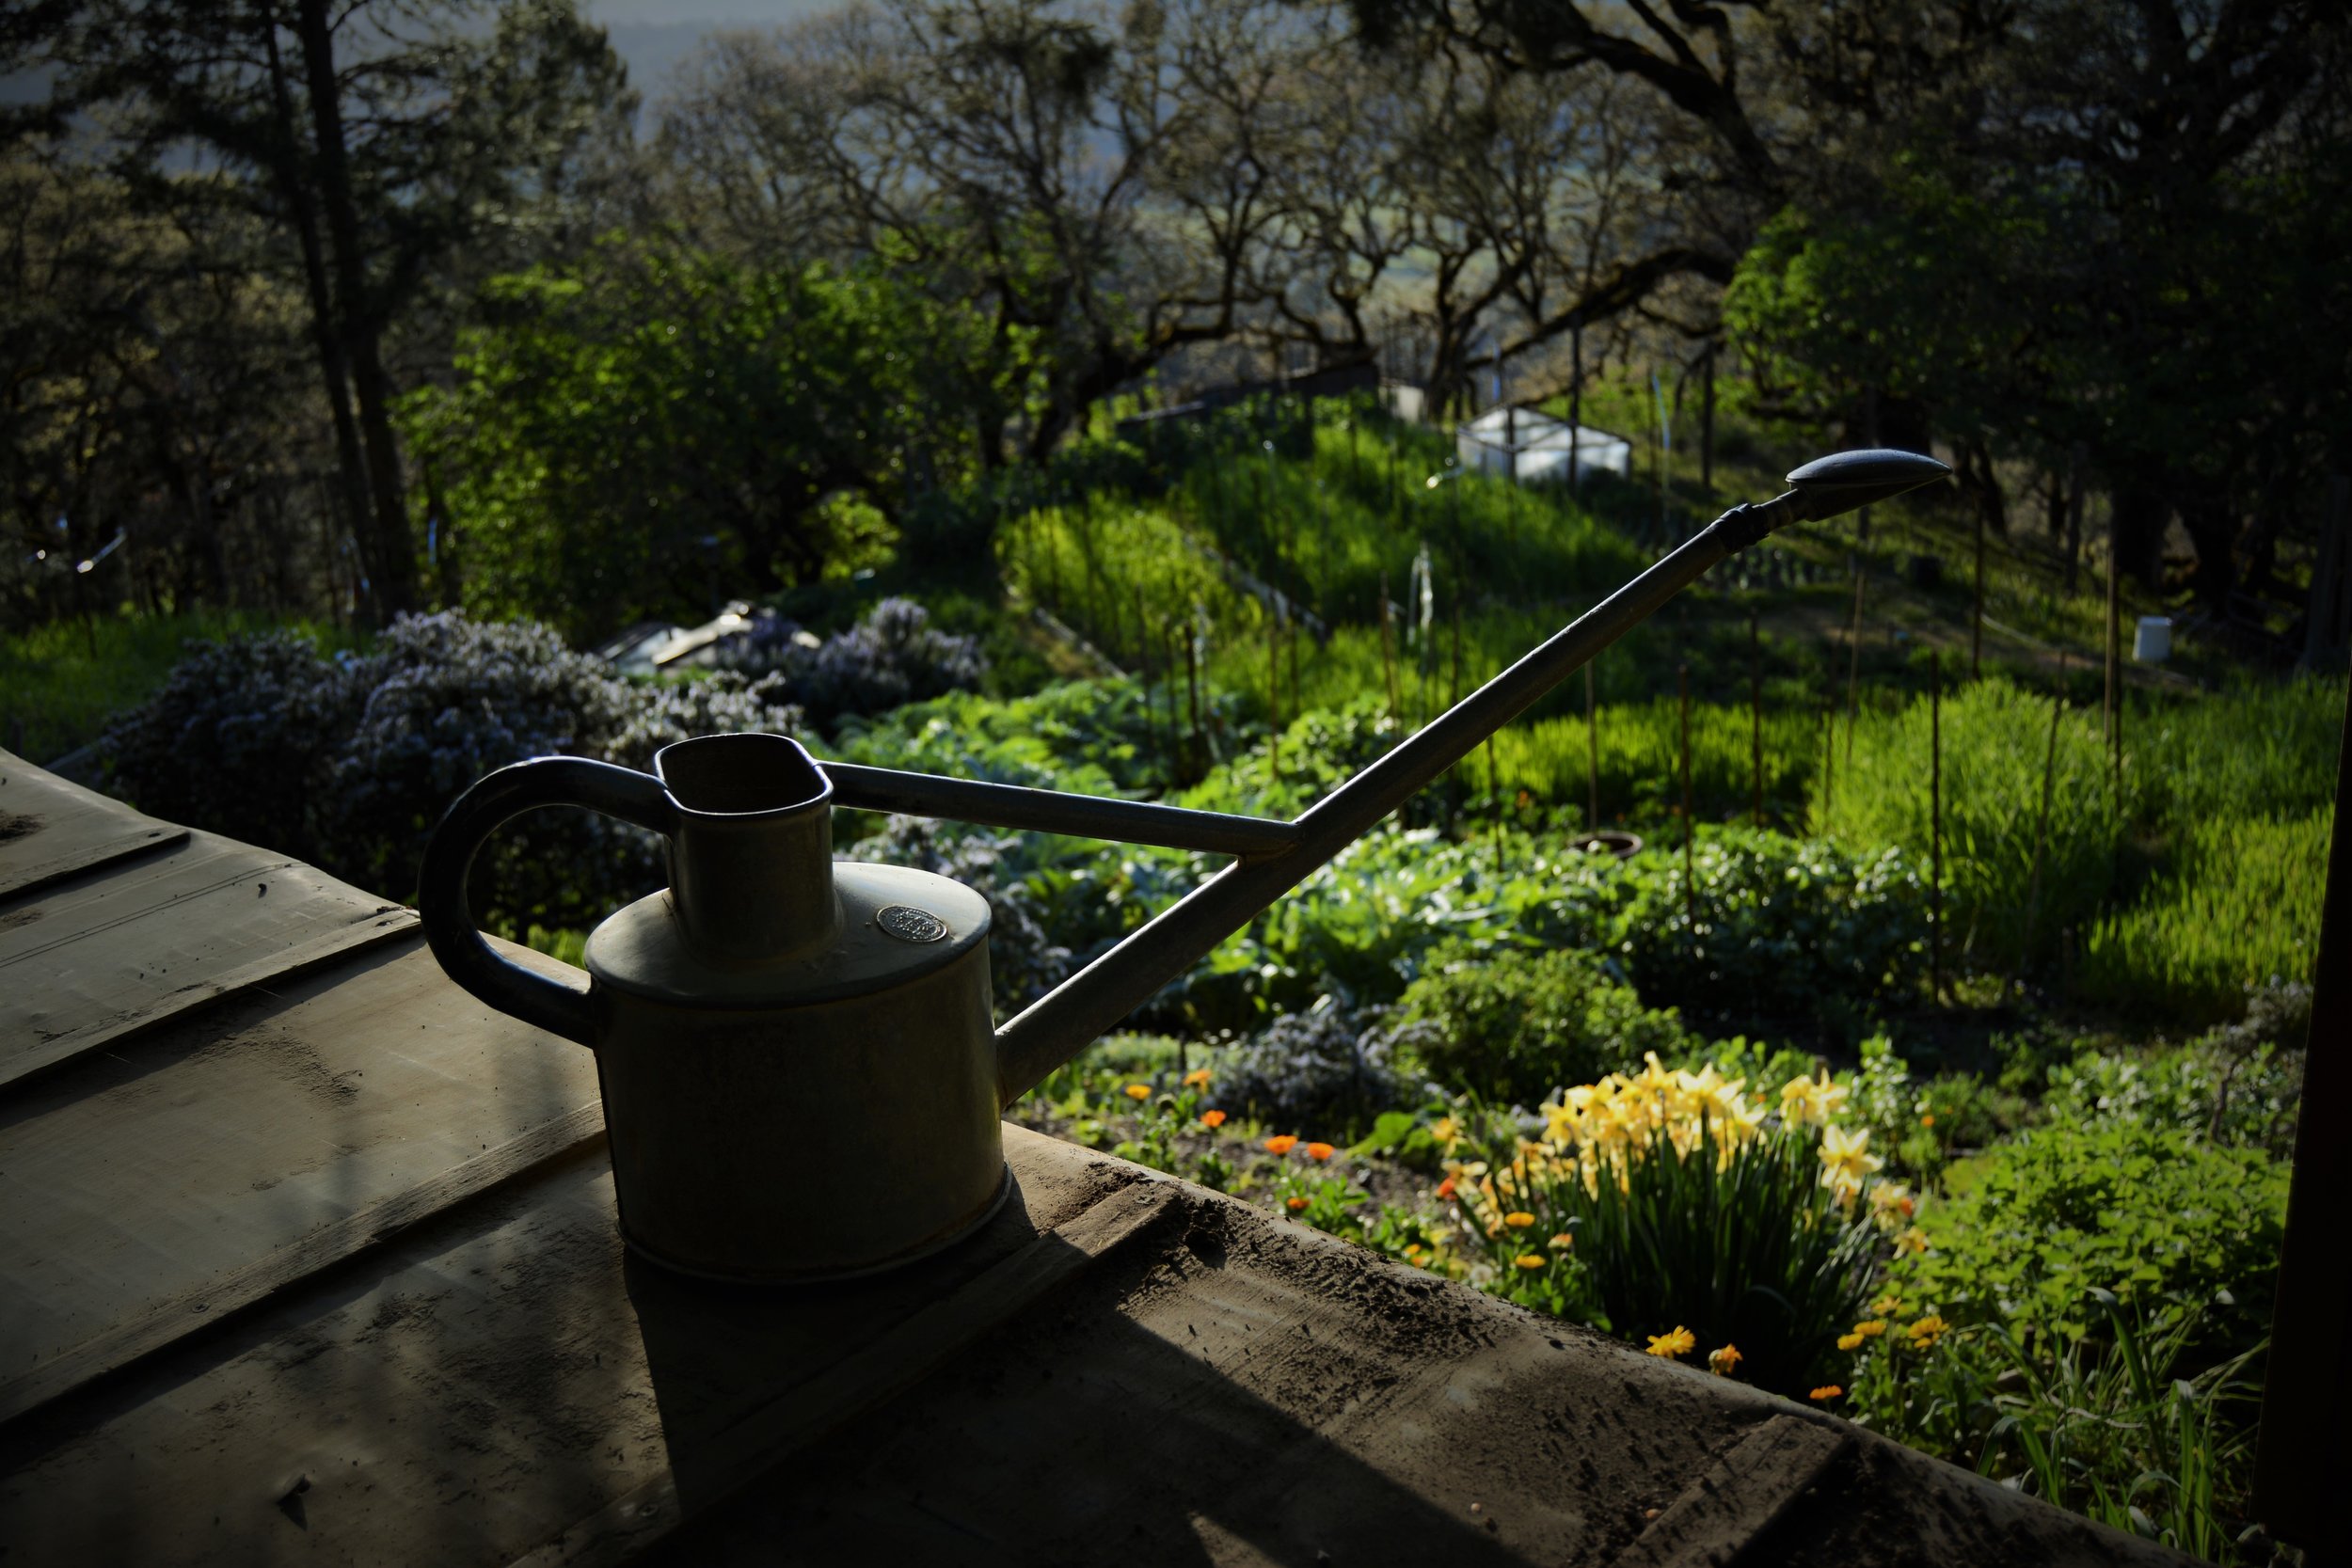 Hauss Watering can, our choice for watering seedlings.